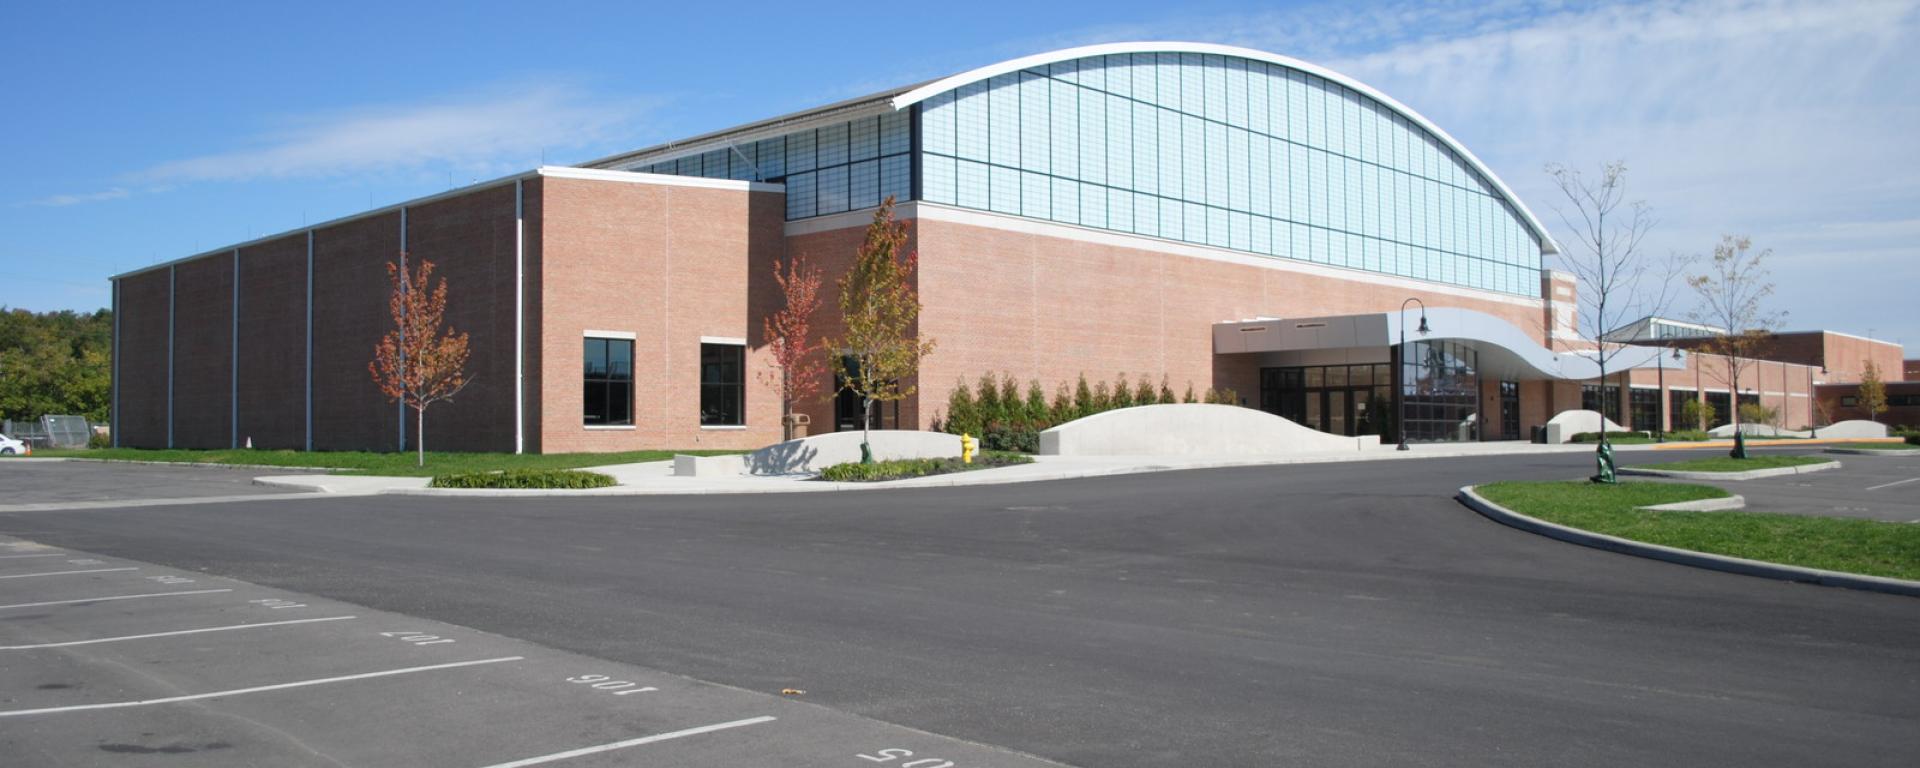 parking lot and front entrance